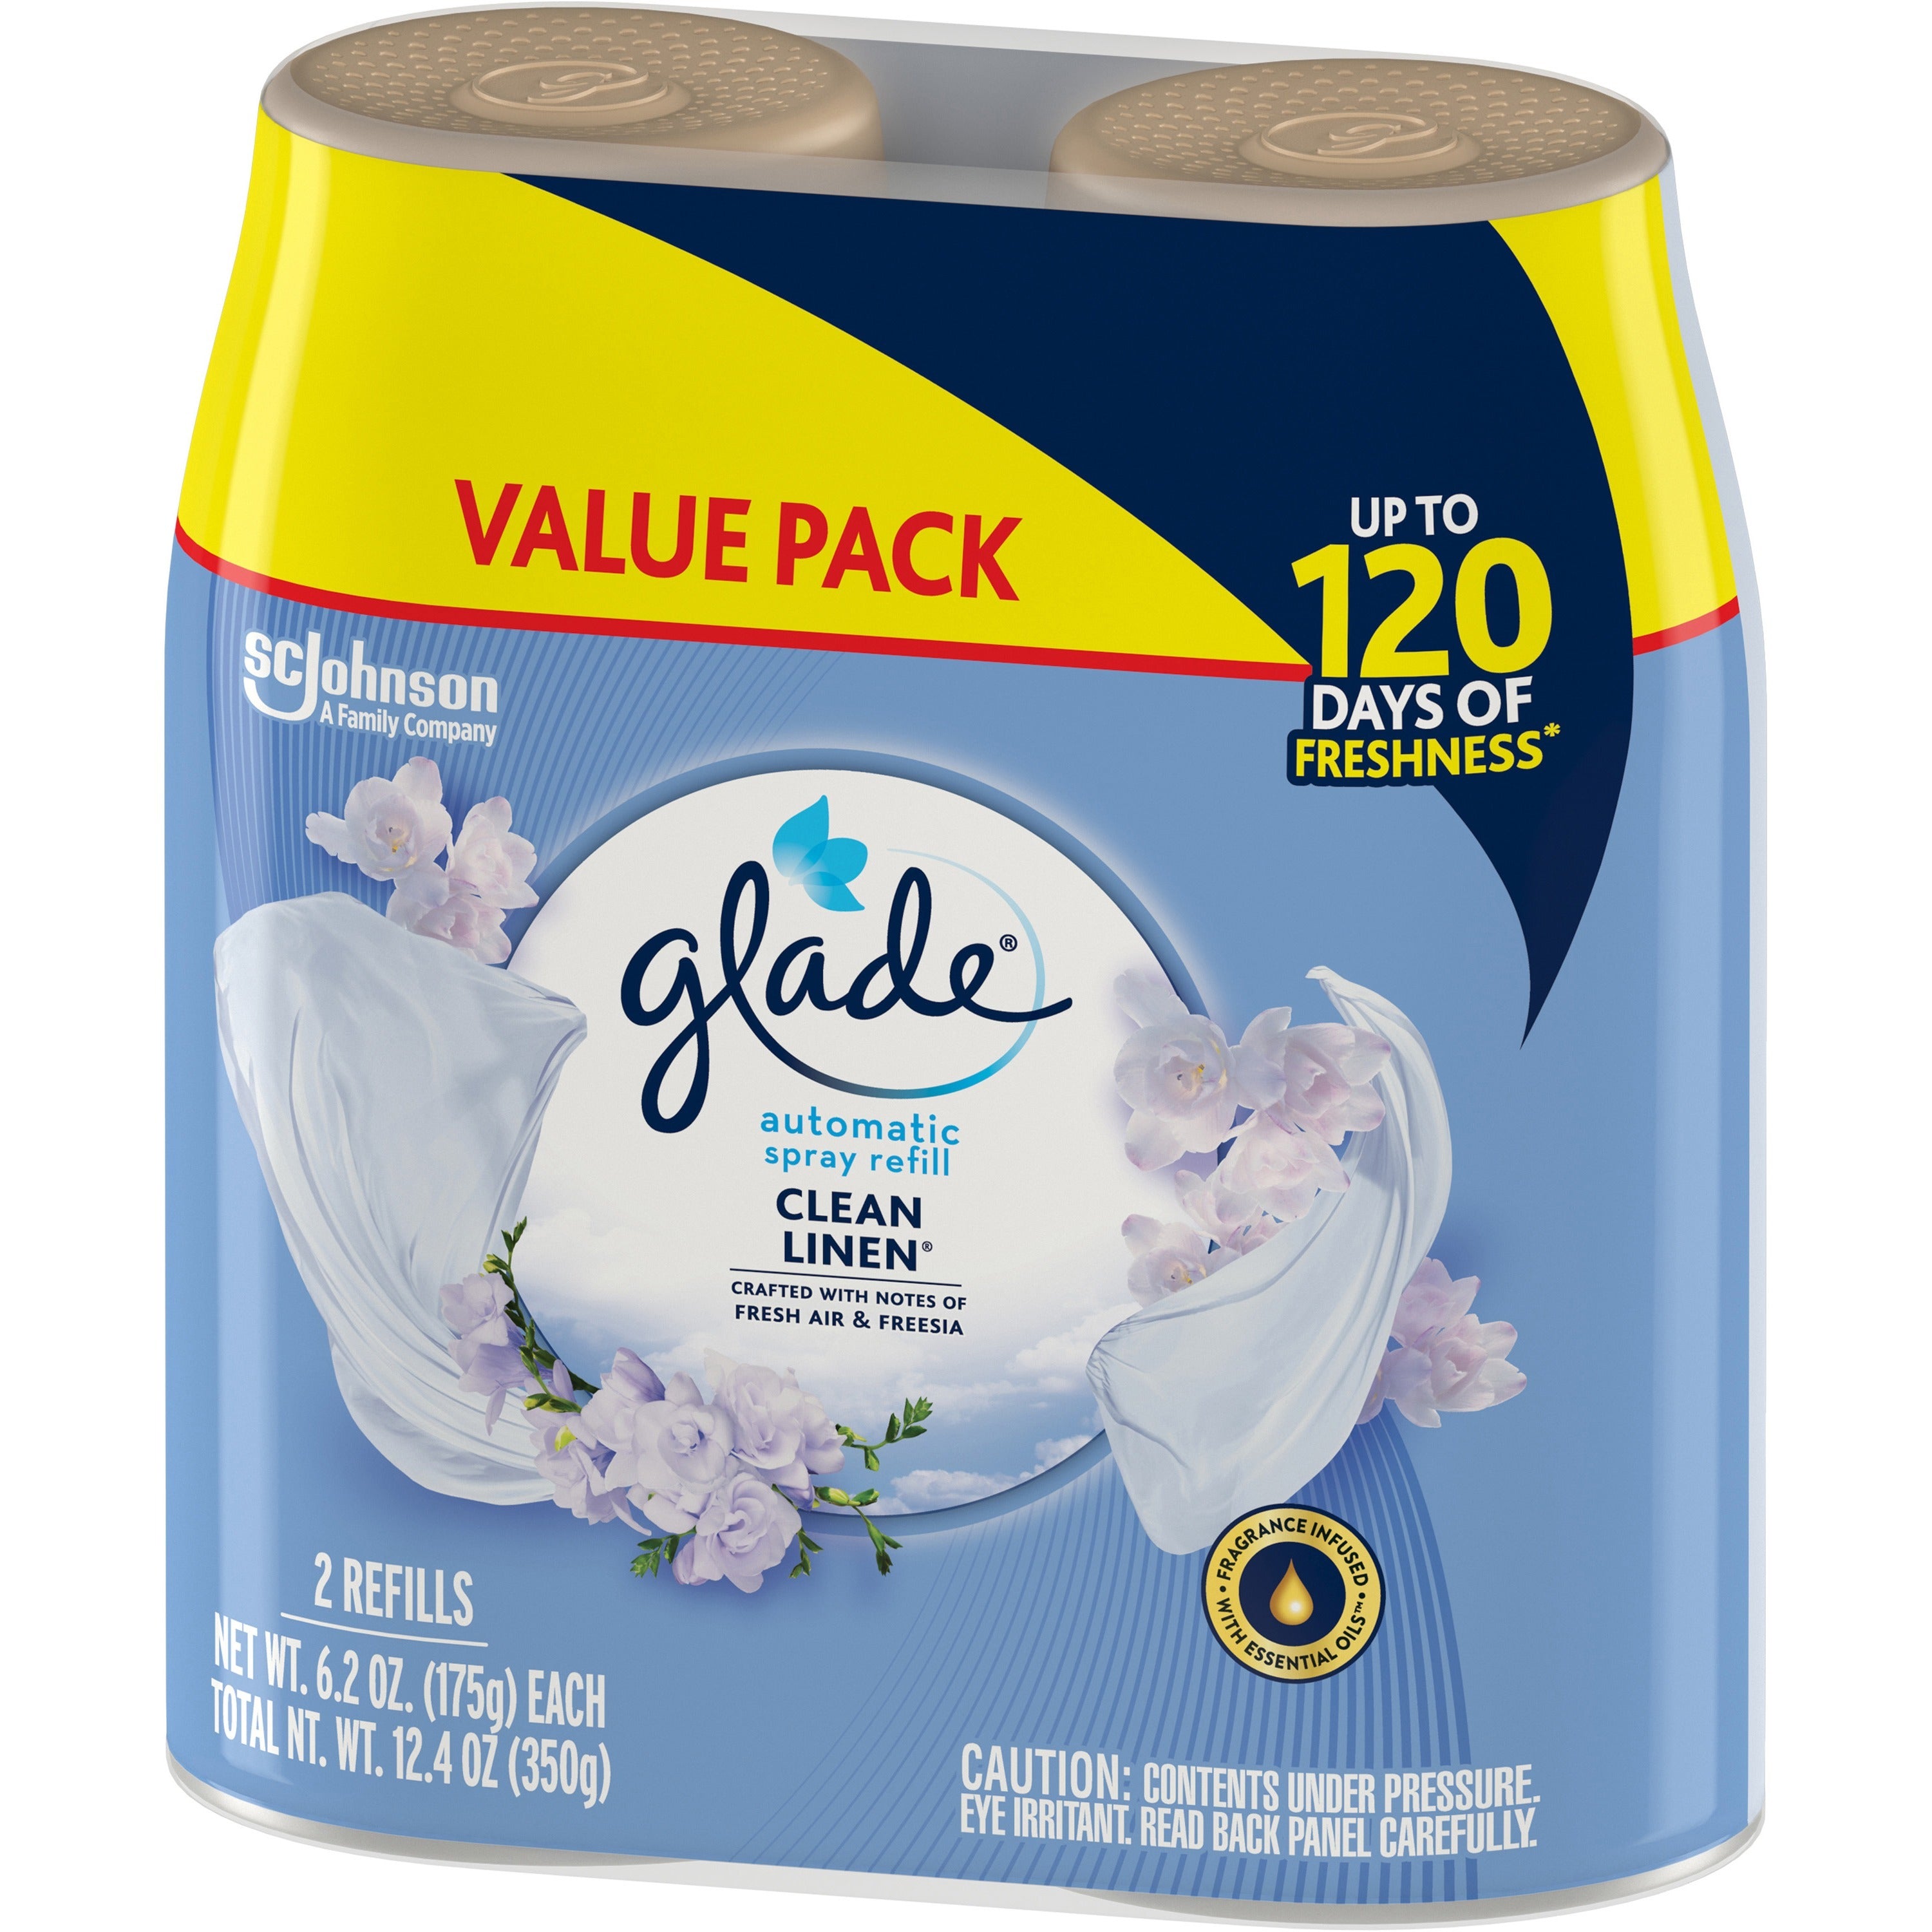 glade-automatic-spray-refill-value-pack-1240-oz-clean-linen-60-day-3-carton-long-lasting-phthalate-free-paraben-free-formaldehyde-free_sjn329388ct - 3